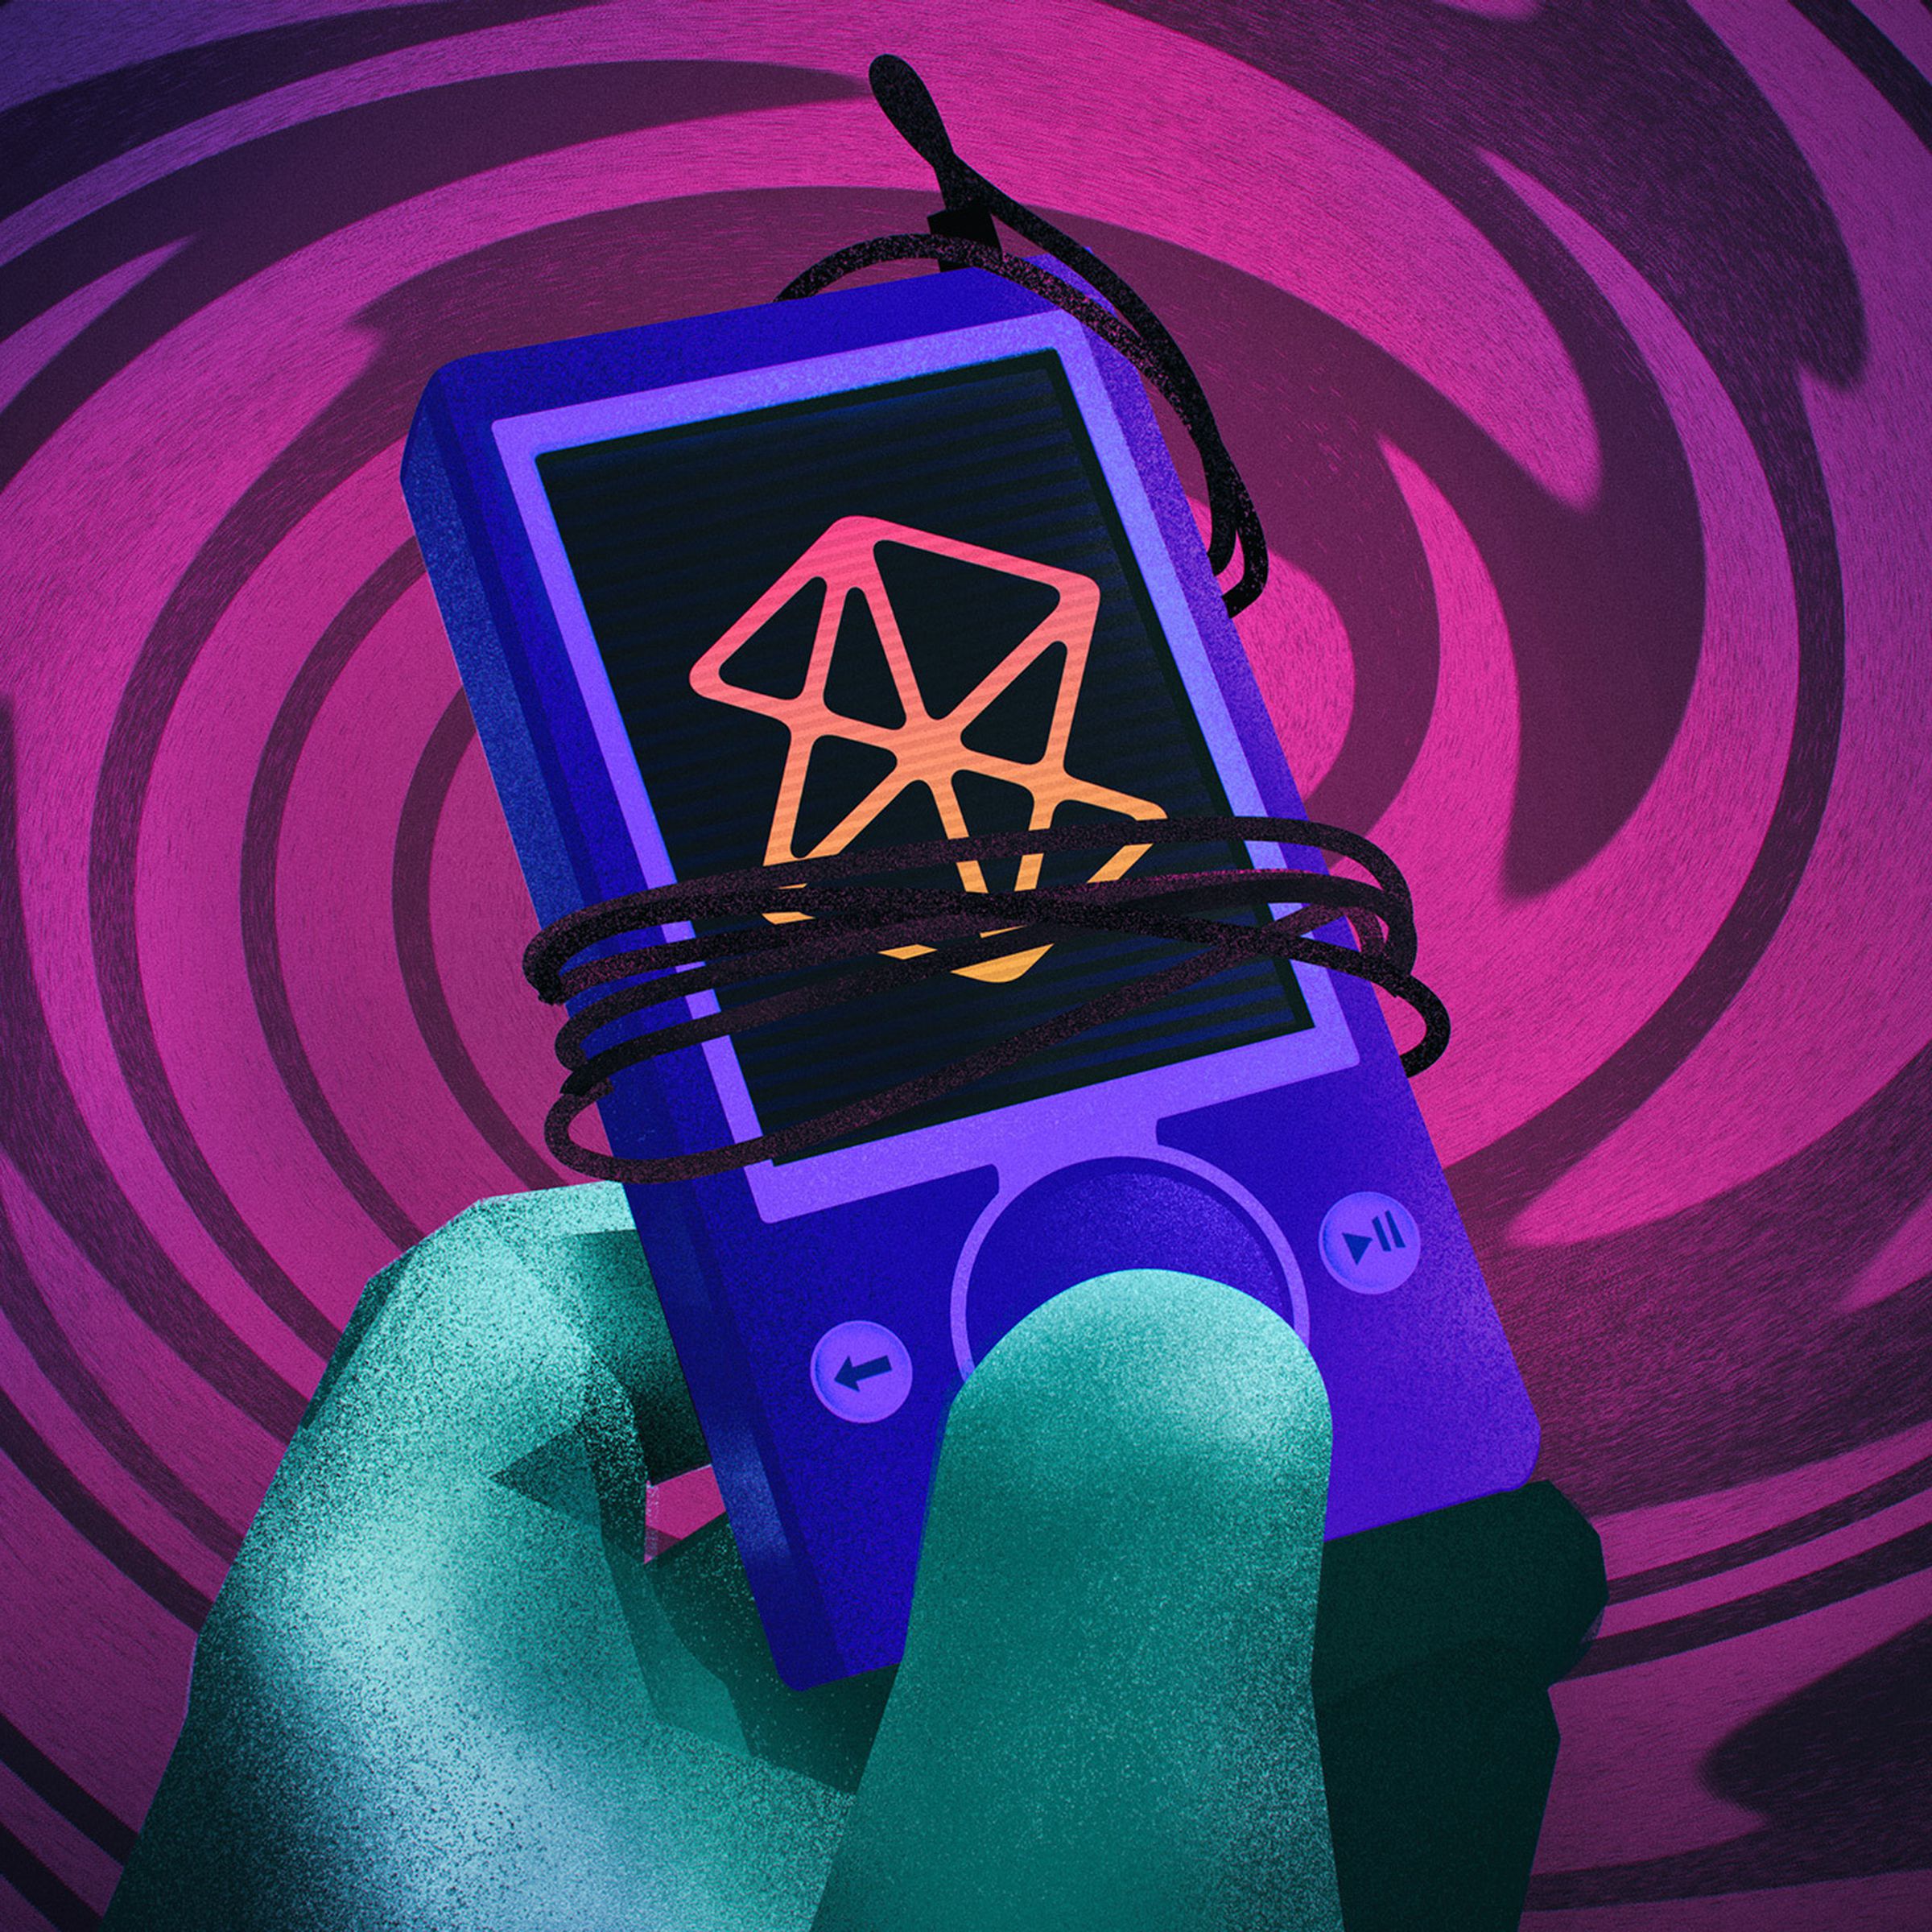 illustration of a Zune with a cable wrapped around it and purple hues